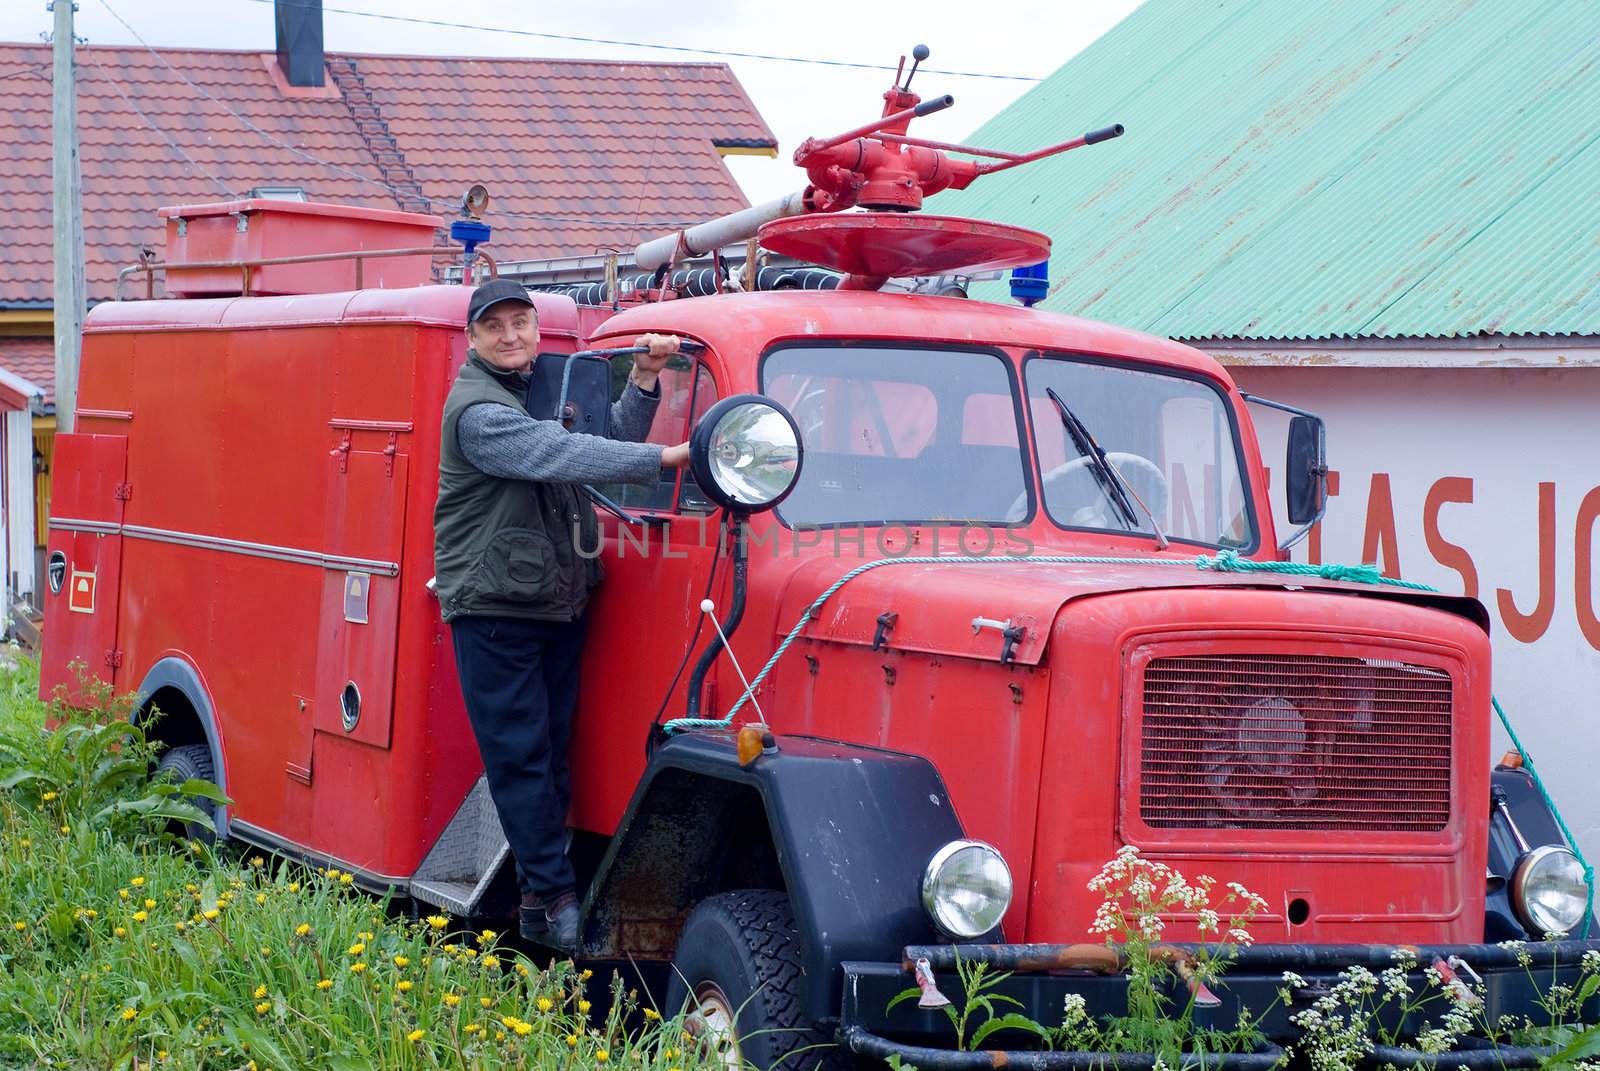 The man is on an ancient fire-engine with a lantern